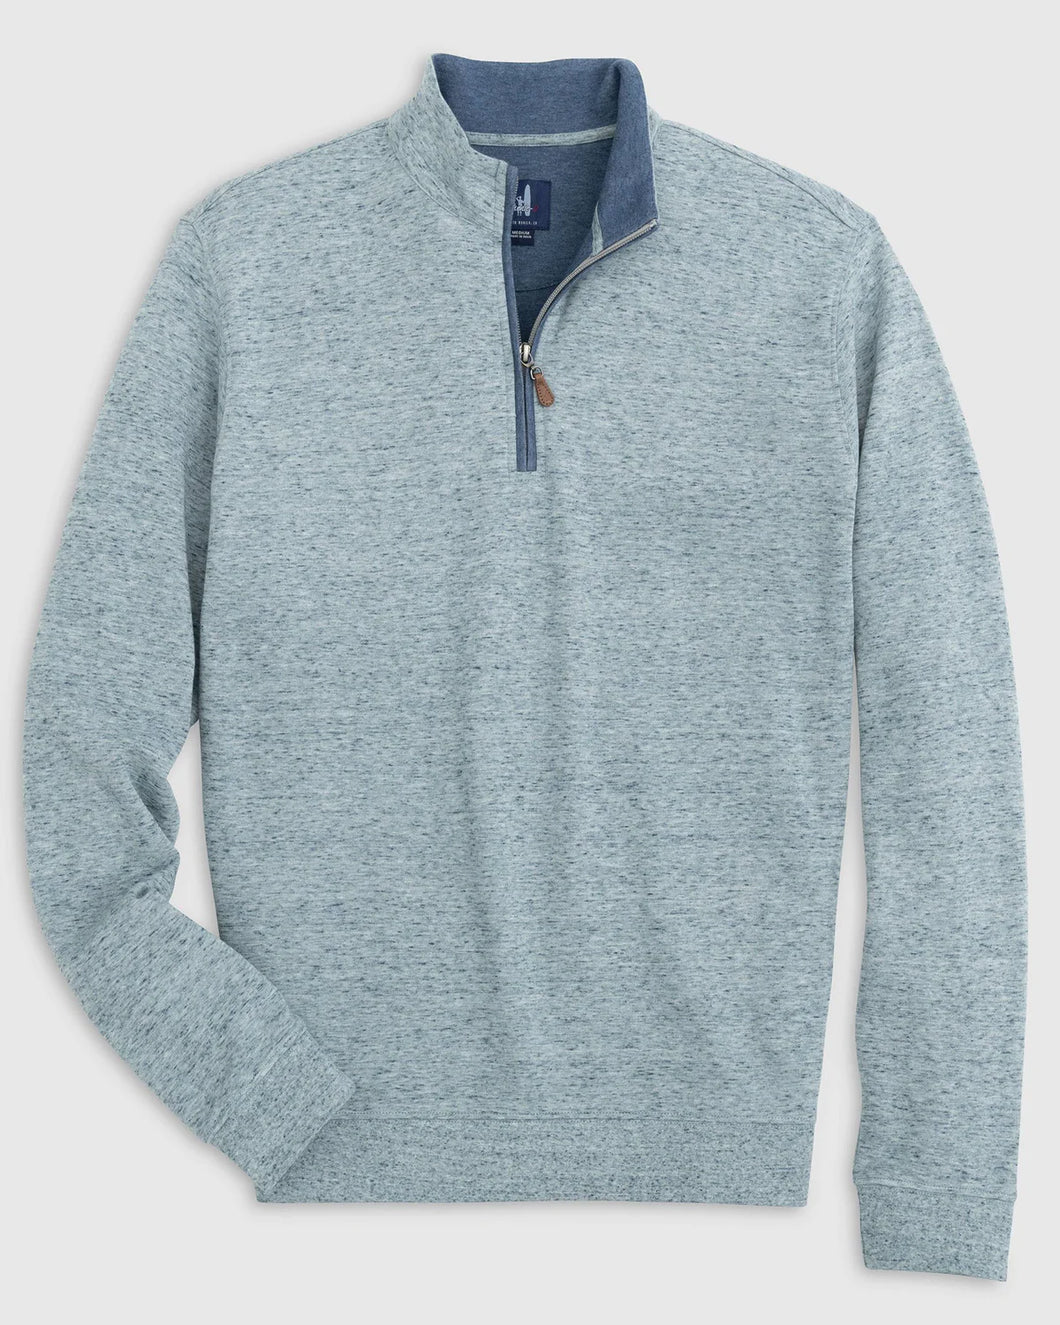 Johnnie-O Sully Quarter-Zip Pullover in Shadow